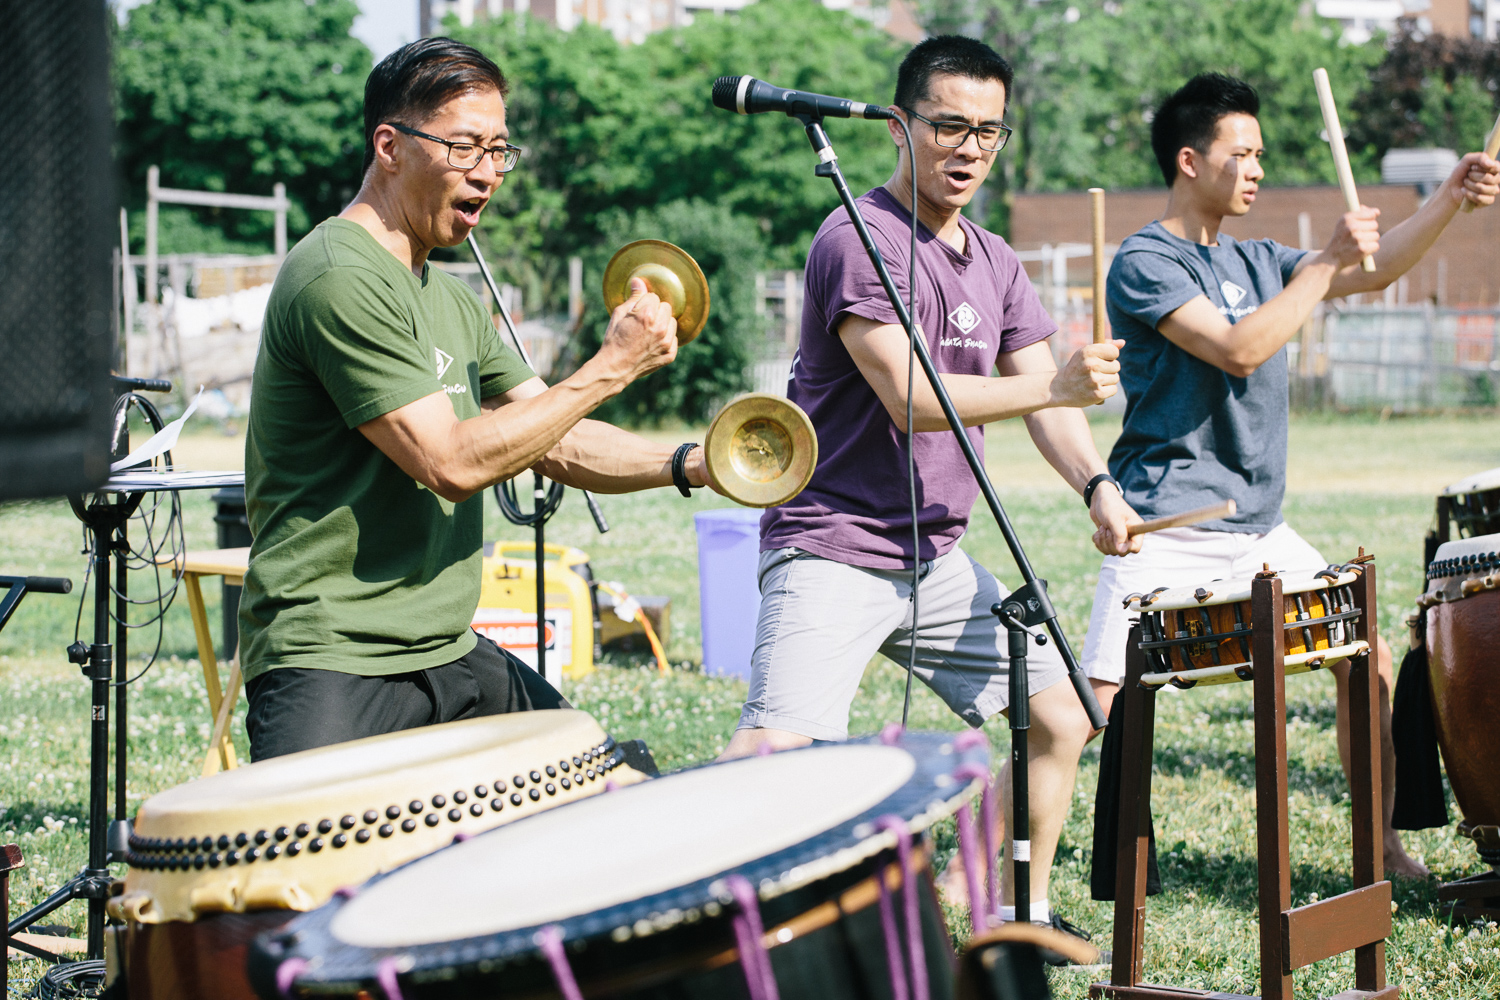 Three men play drums and cymbals as they perform on the grass.